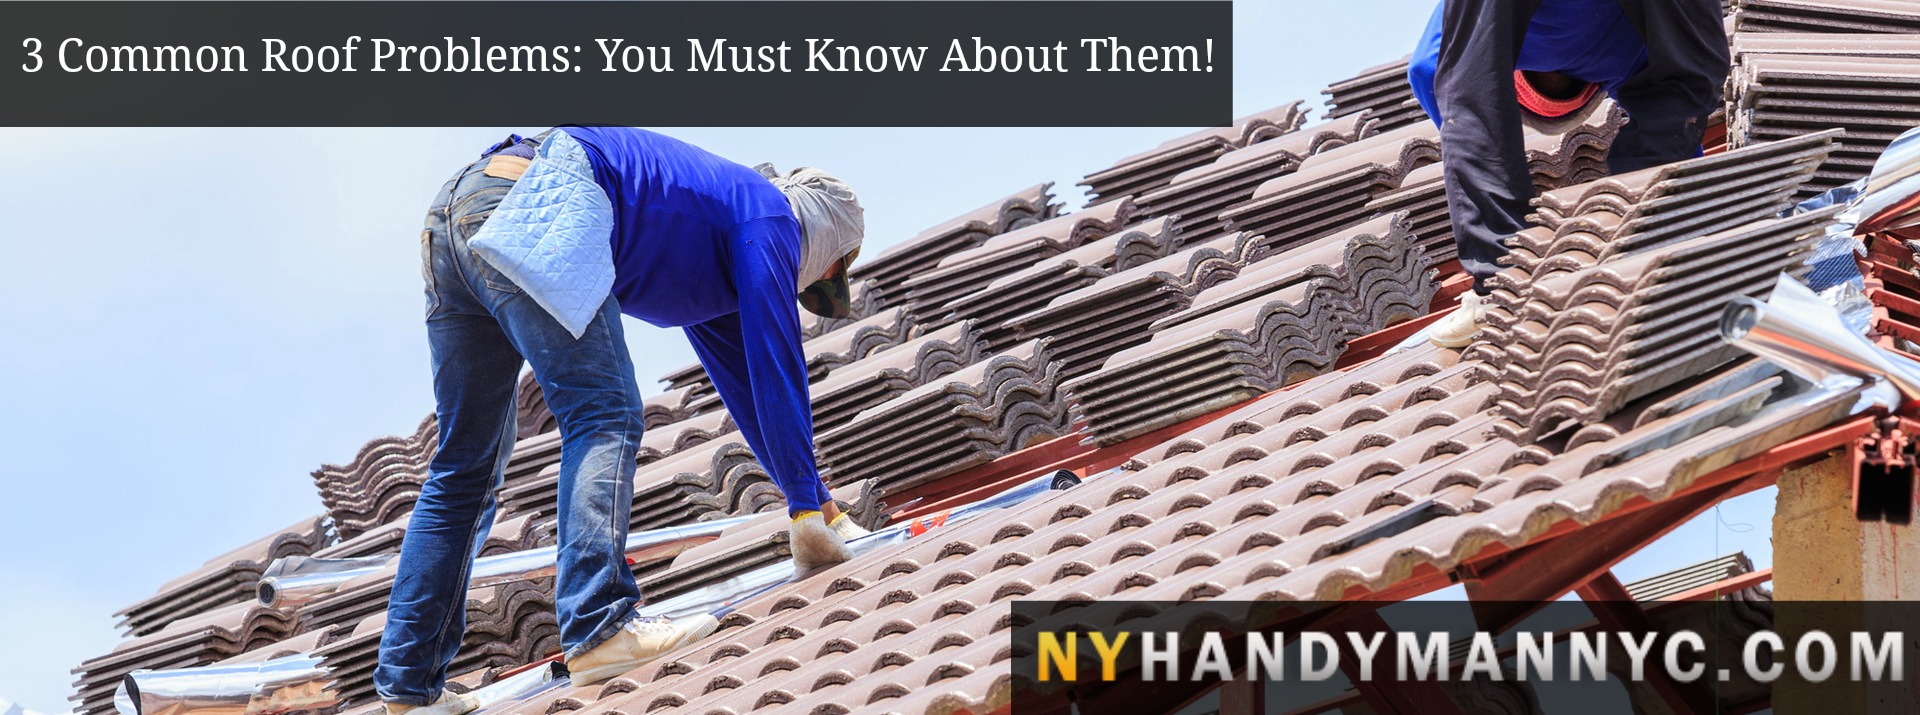 3 Common Roof Problems You Must Know About Them